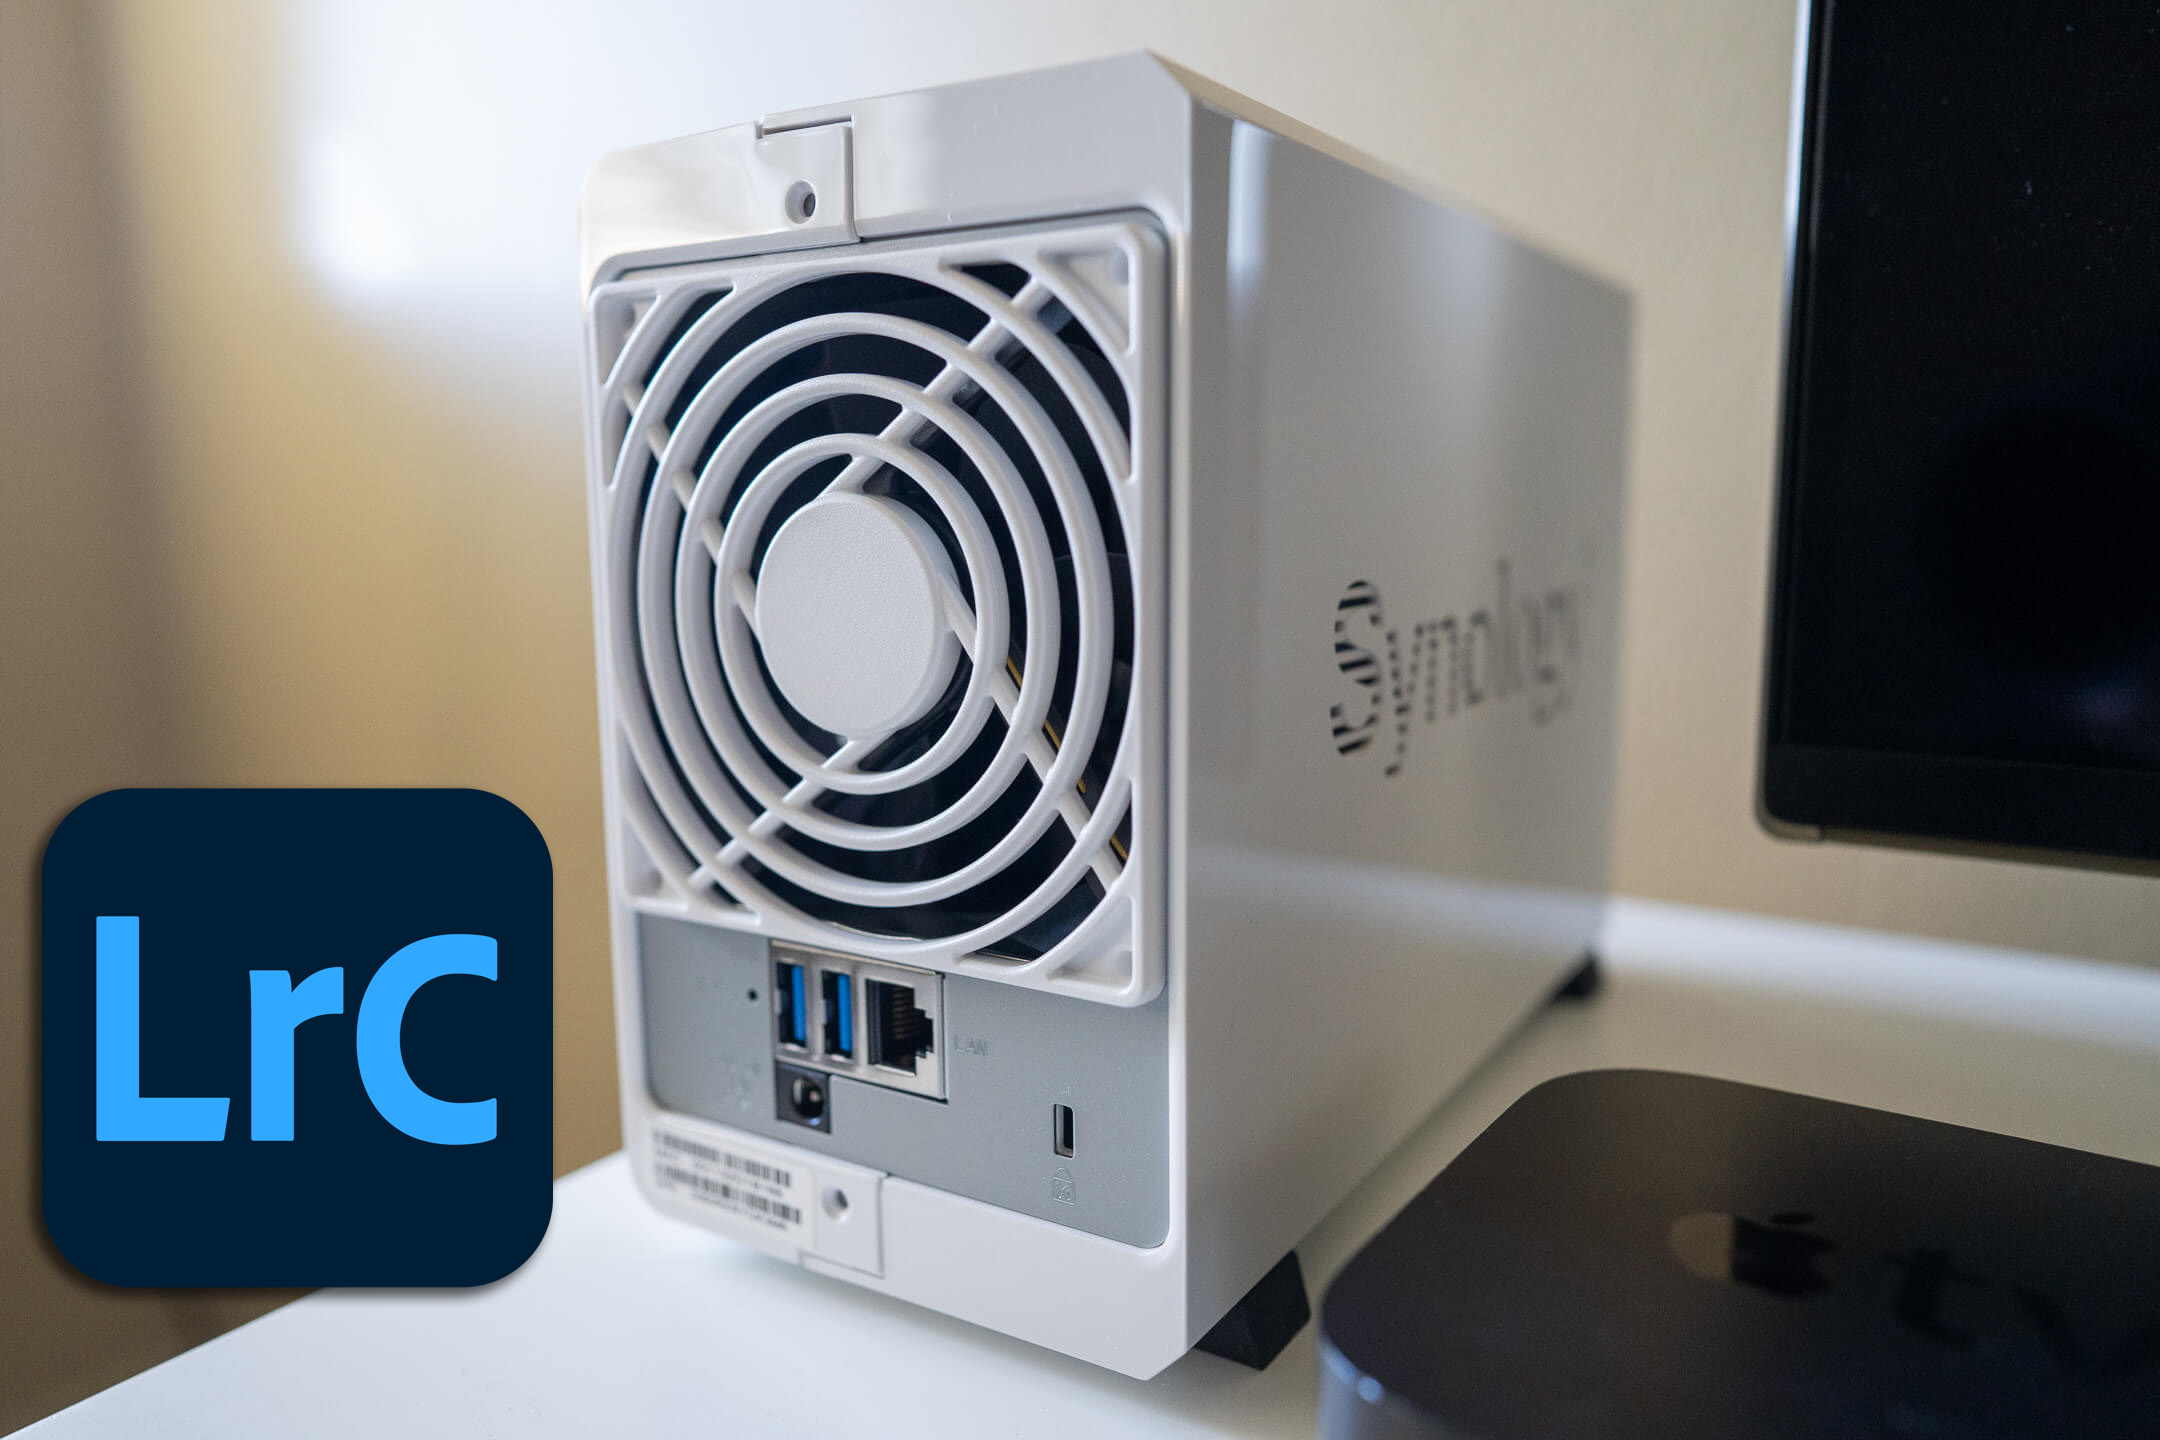 Store files to Synology NAS from a Mac computer within the local network